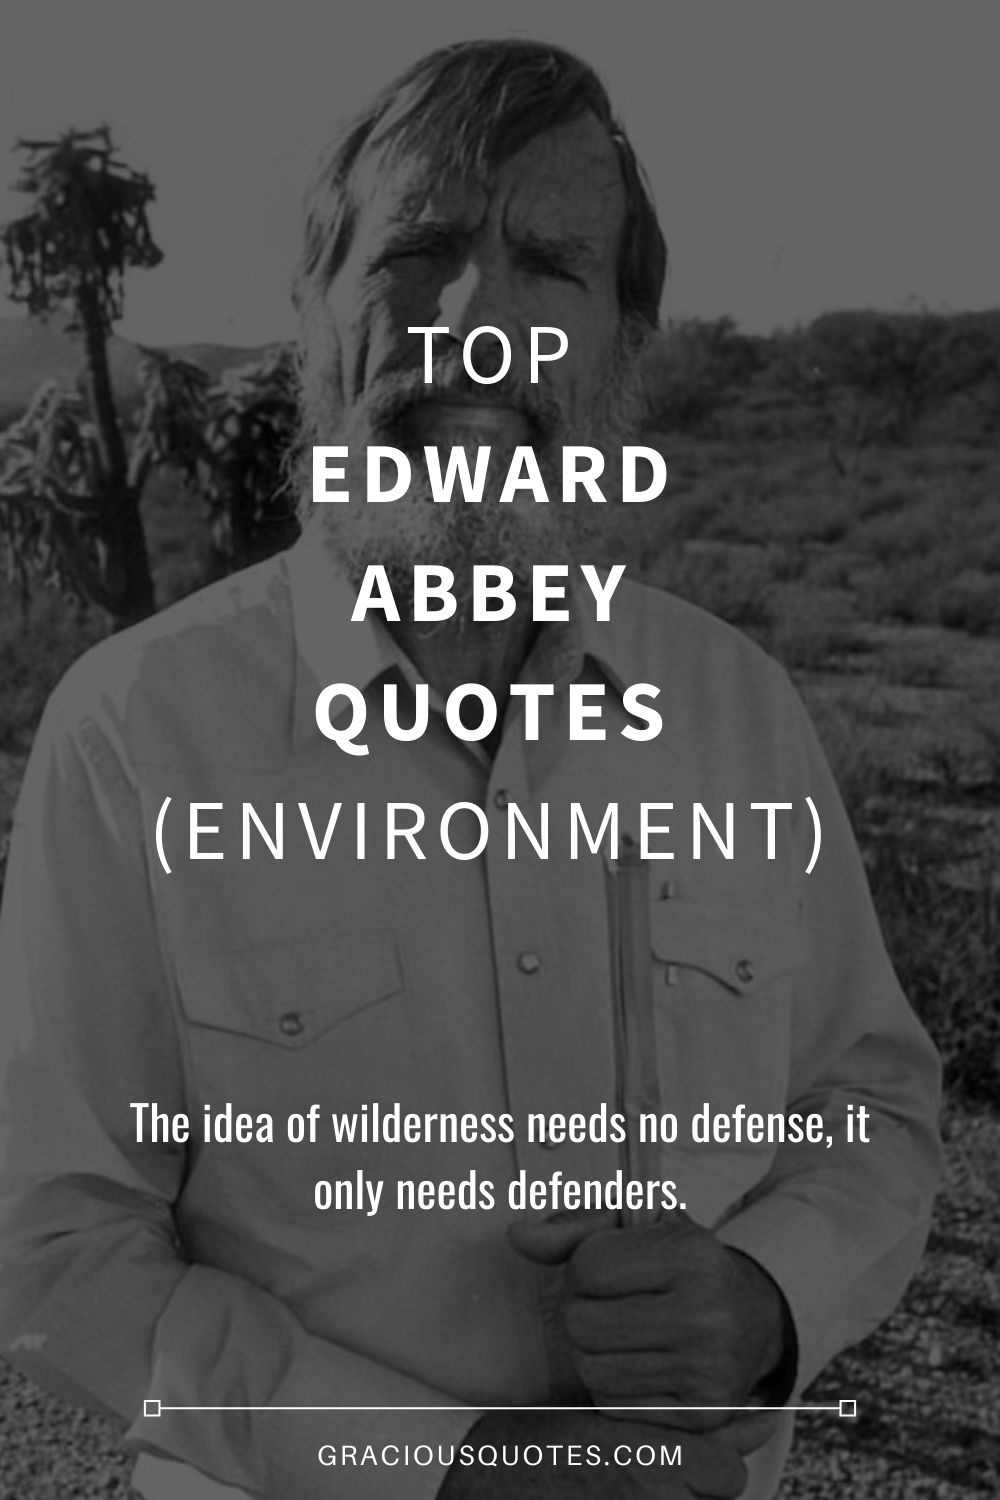 Top Edward Abbey Quotes (ENVIRONMENT) - Gracious Quotes